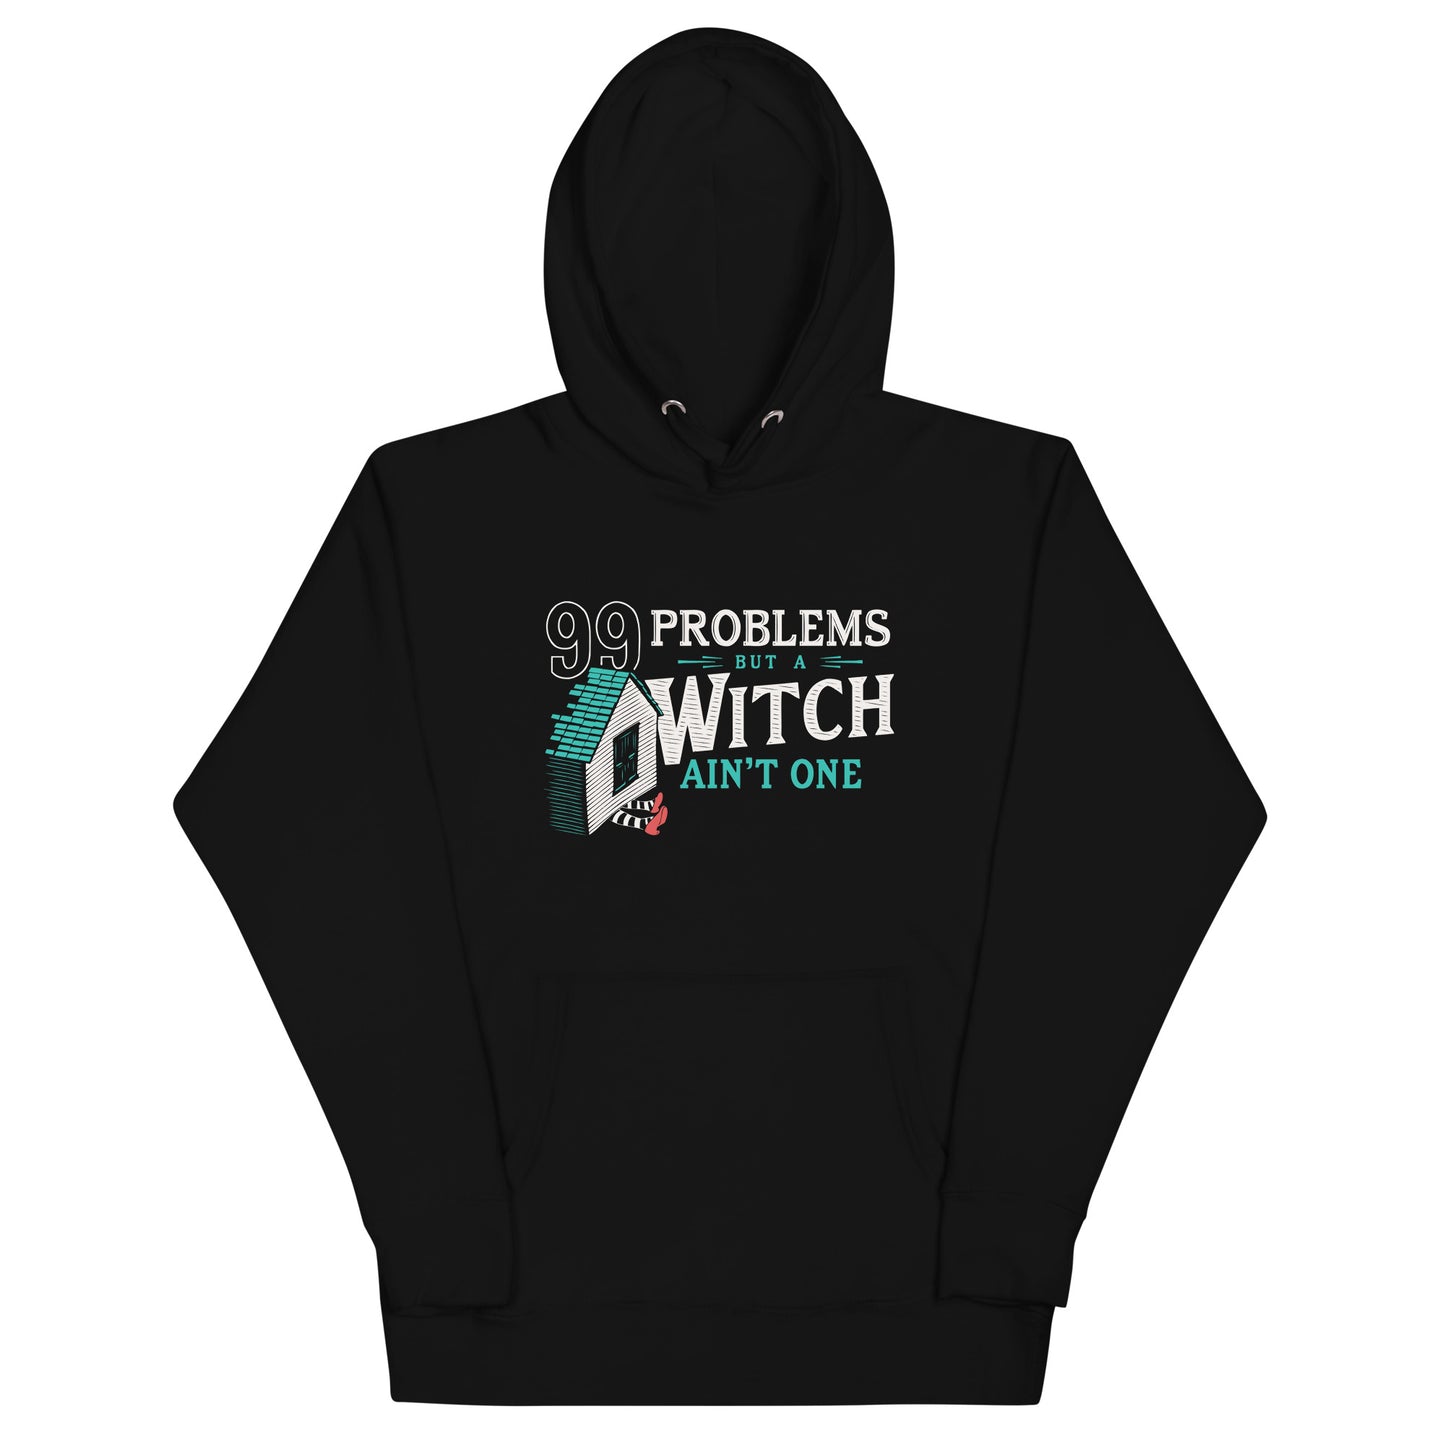 99 Problems But A Witch Ain't One Unisex Hoodie